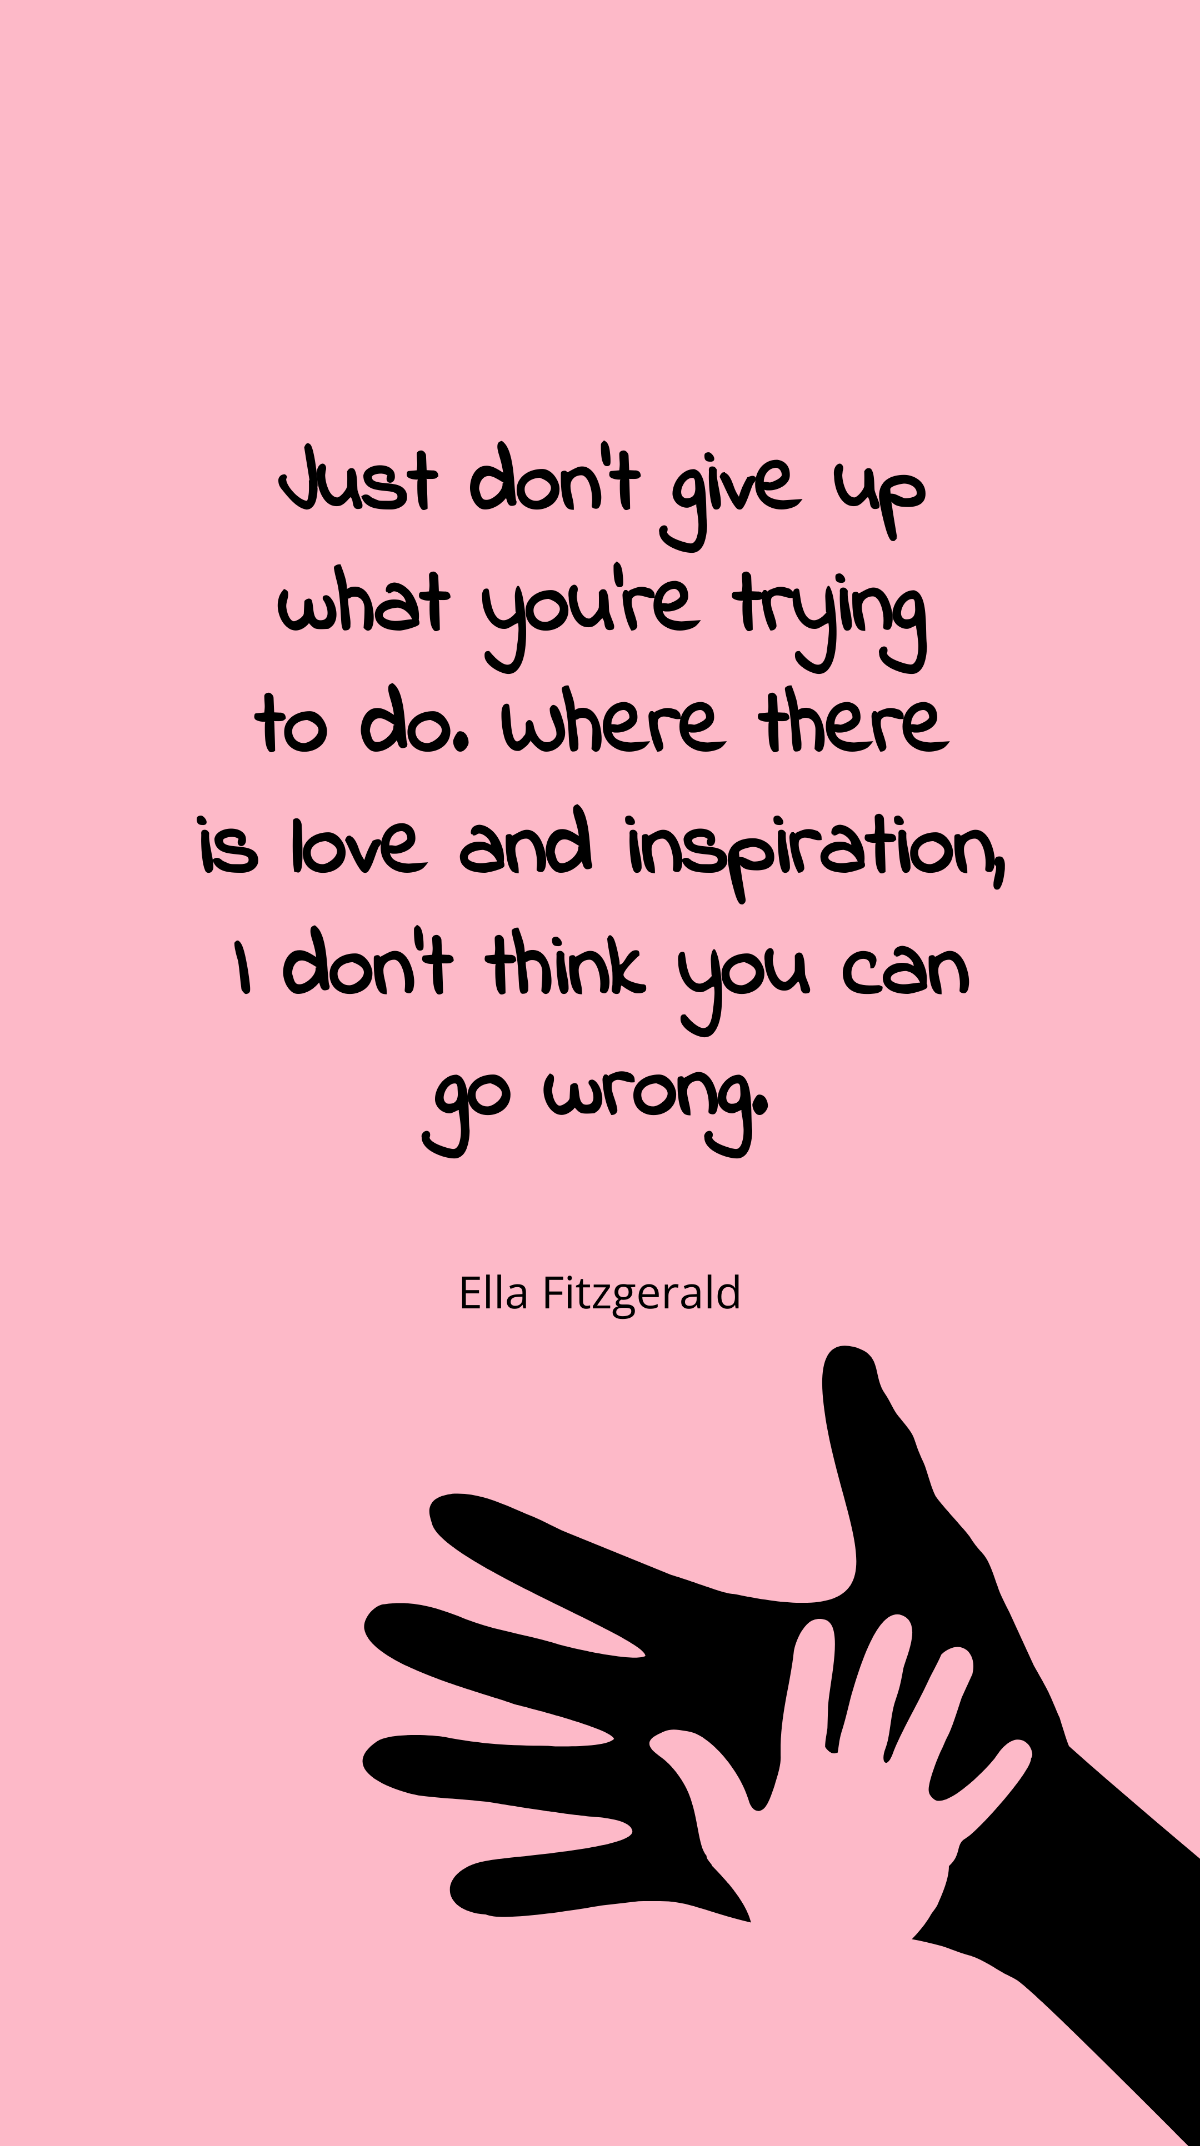 Ella Fitzgerald - Just don't give up what you're trying to do. Where there is love and inspiration, I don't think you can go wrong. Template